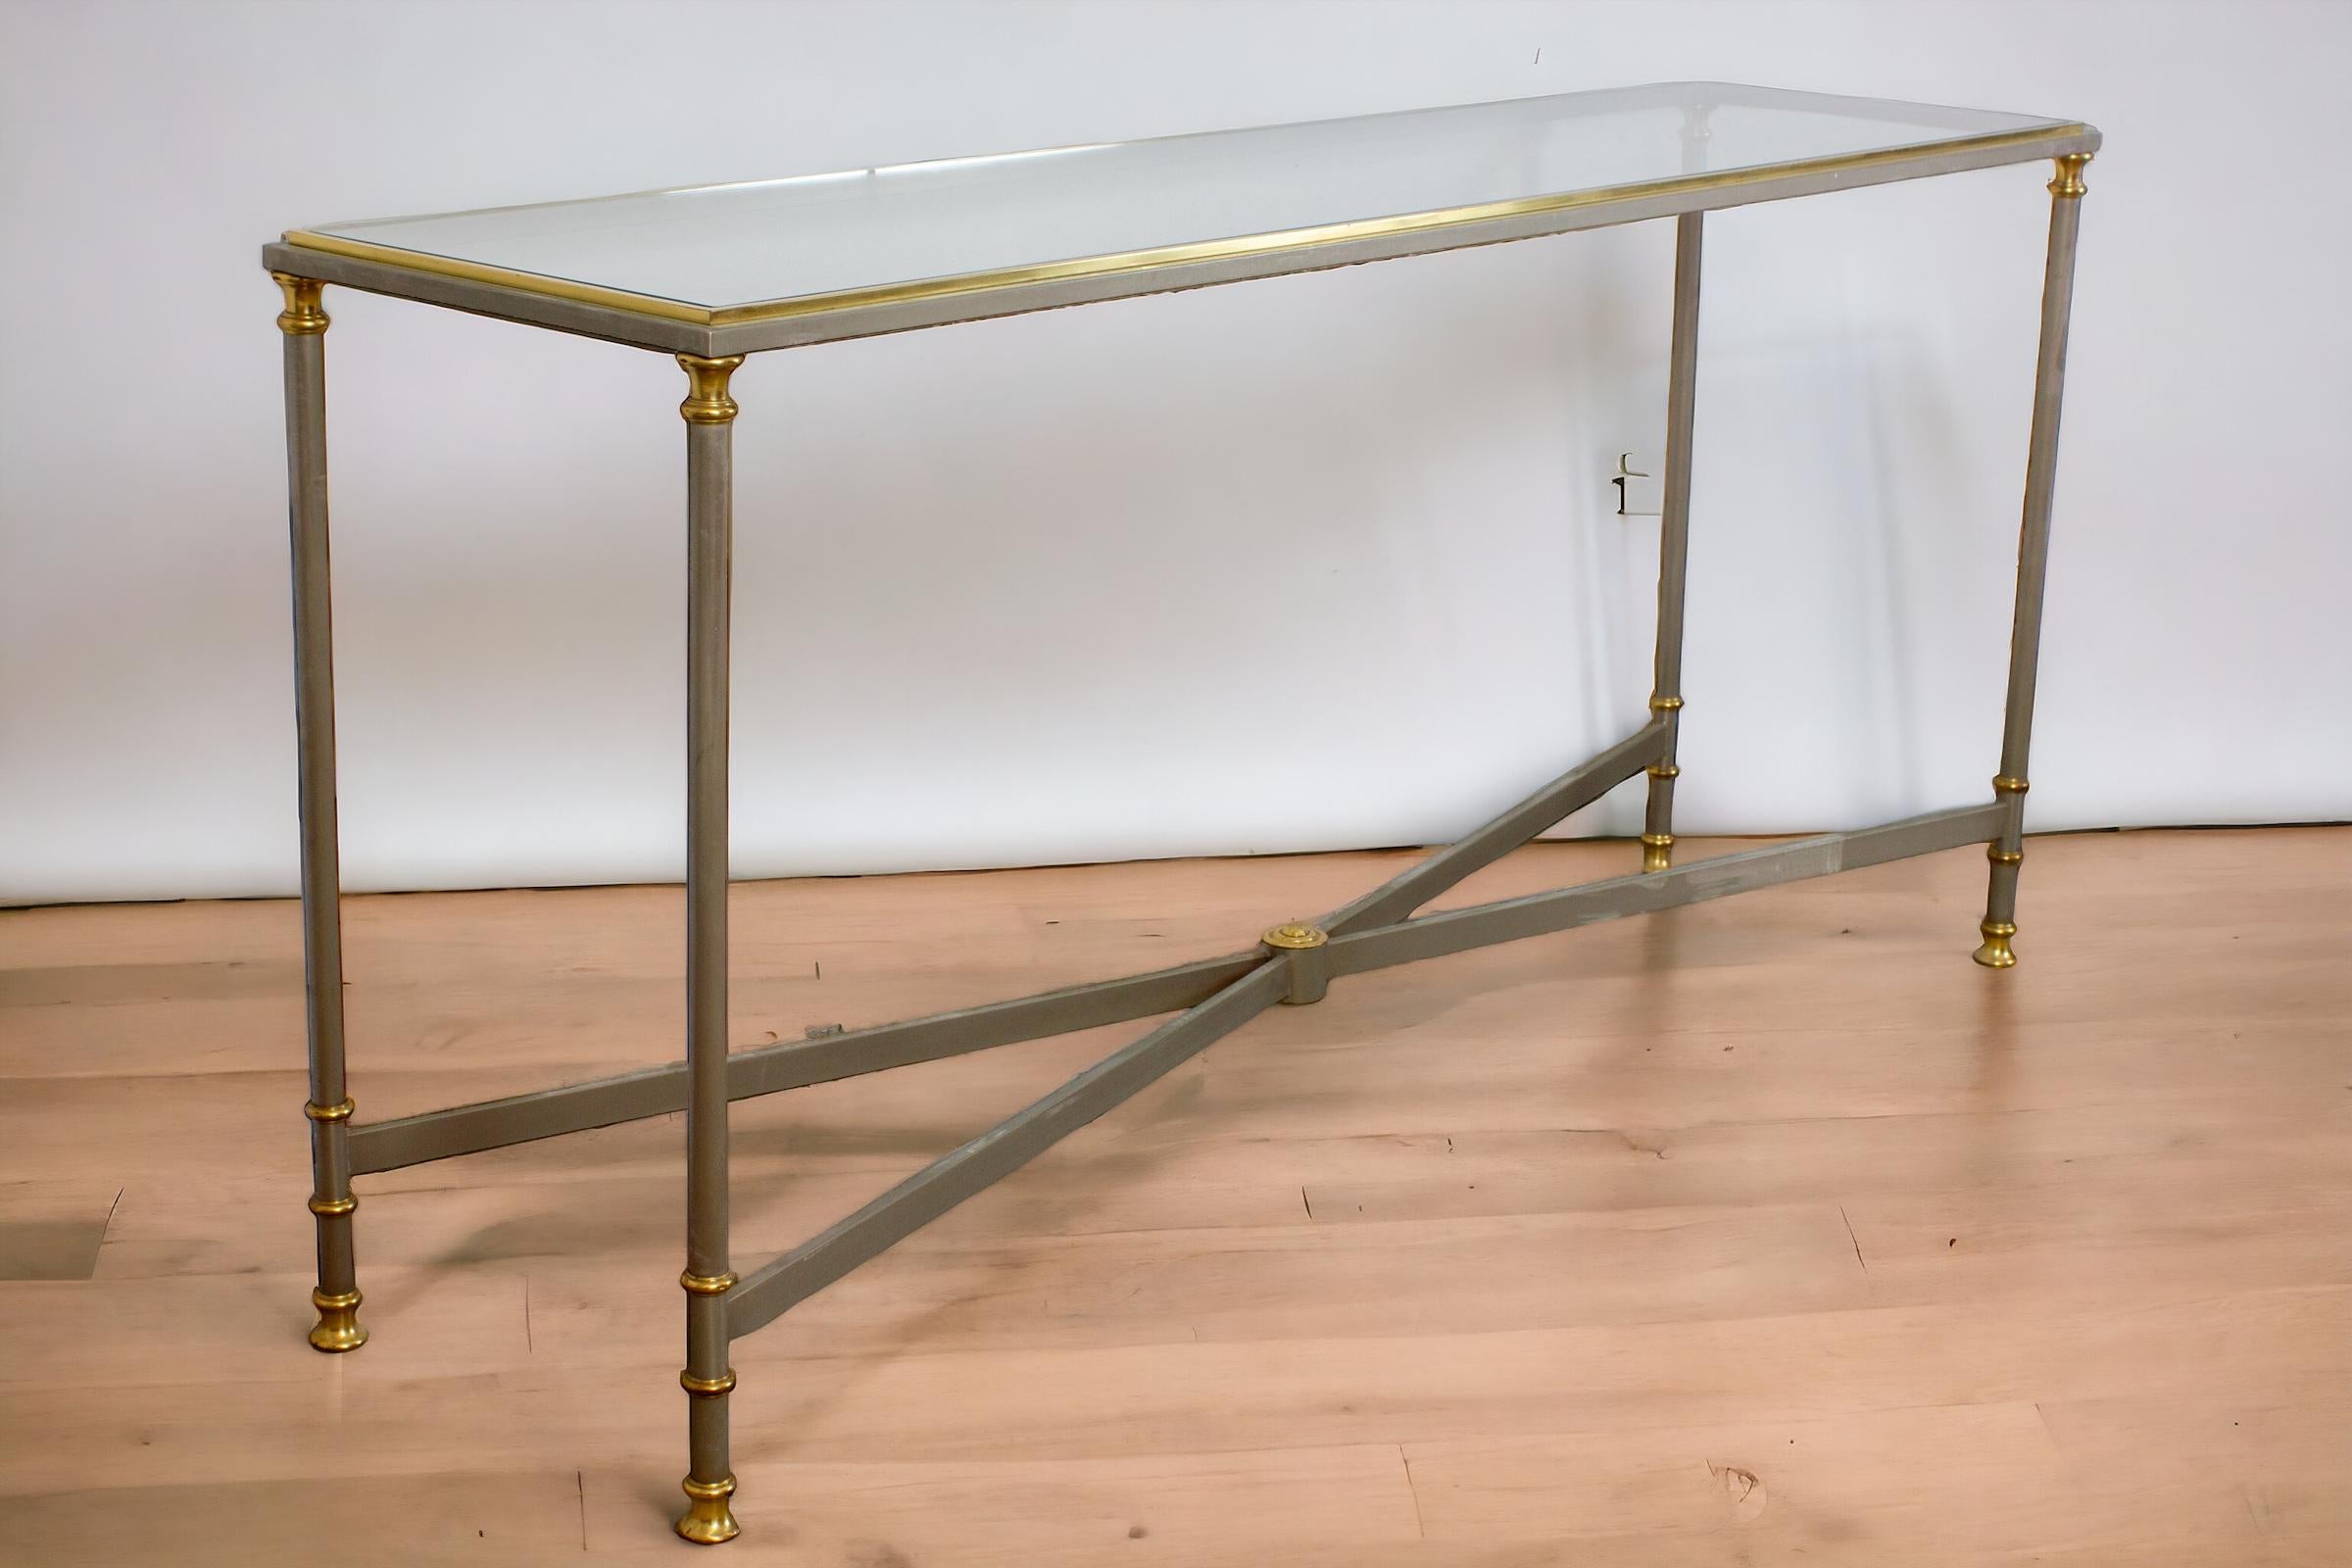 Elegant Italian Midcentury  Iron console table with brass legs and decoration. 
Glass top. Excellent vintage condition .
 Craftmade design by Orlandi the worldwide famous Italian forging iron company .
 This model was designed for the interior